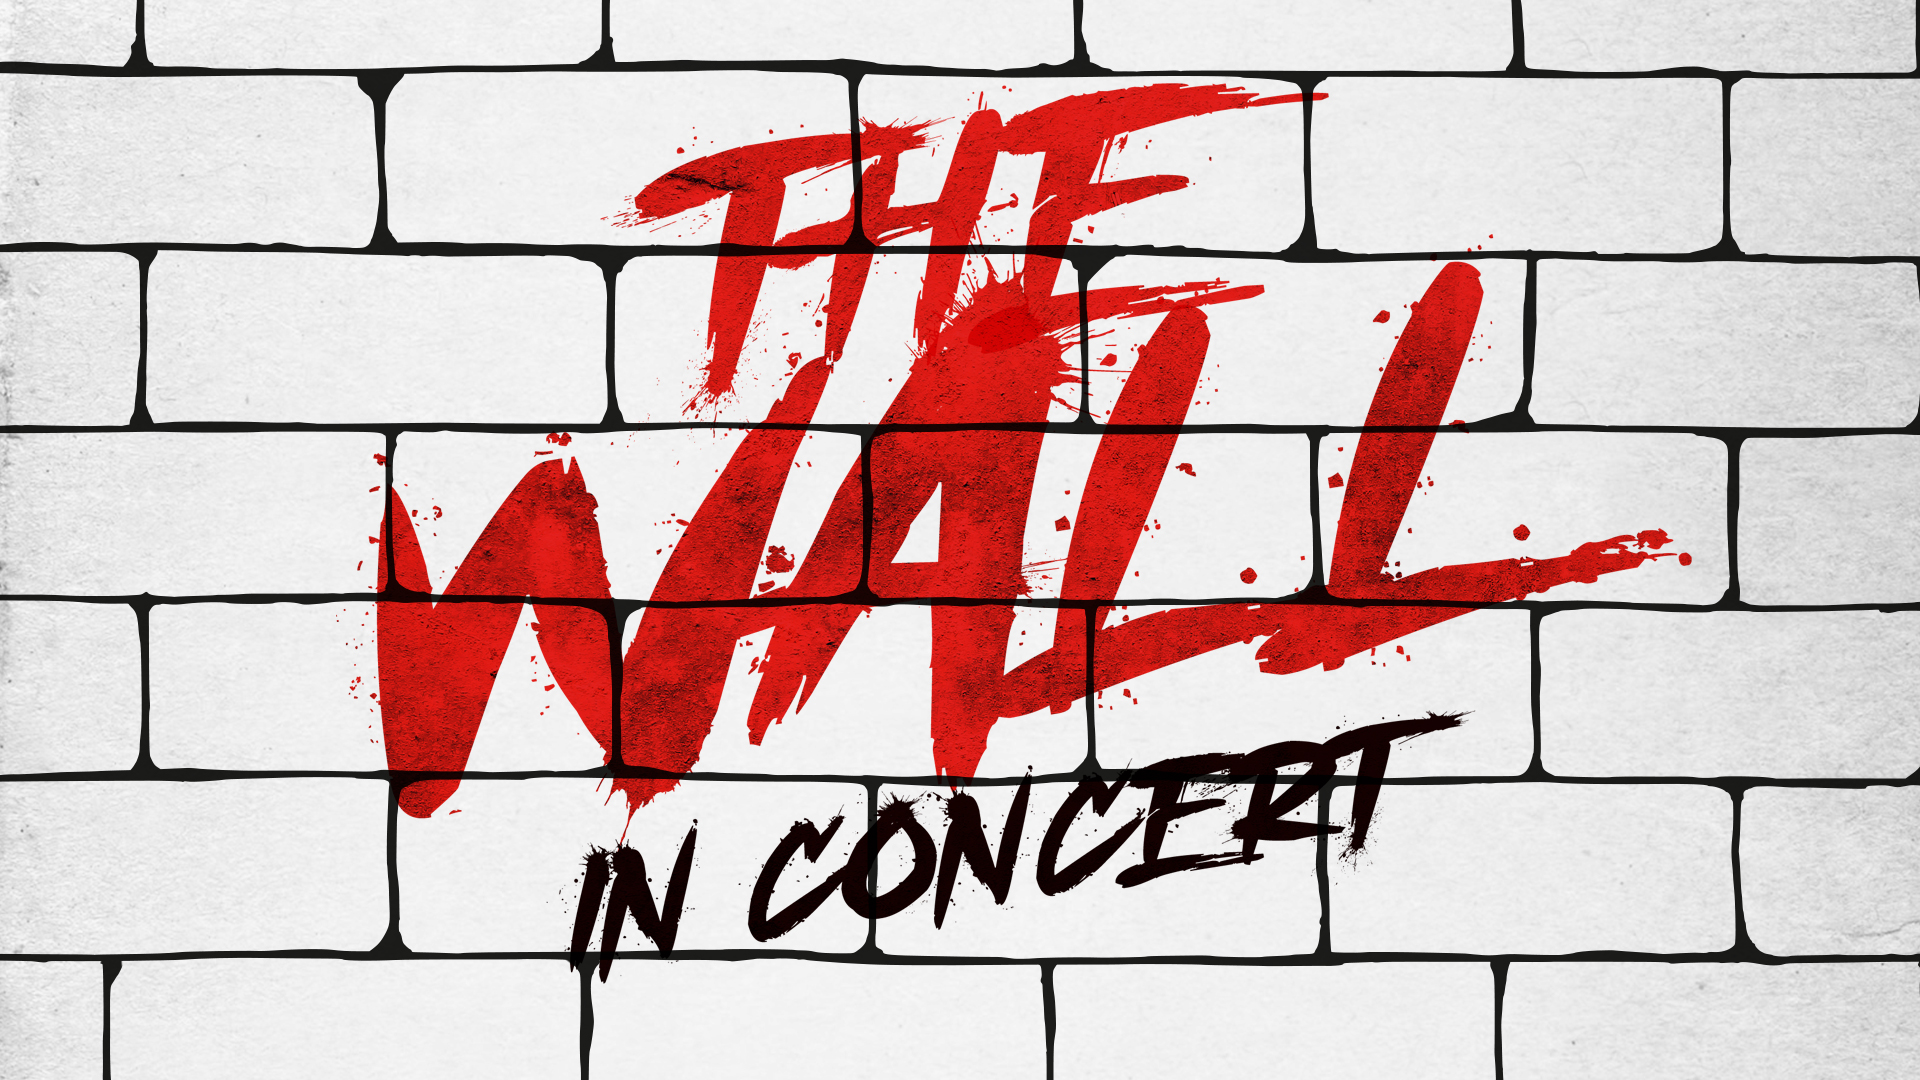 The Wall in Concert